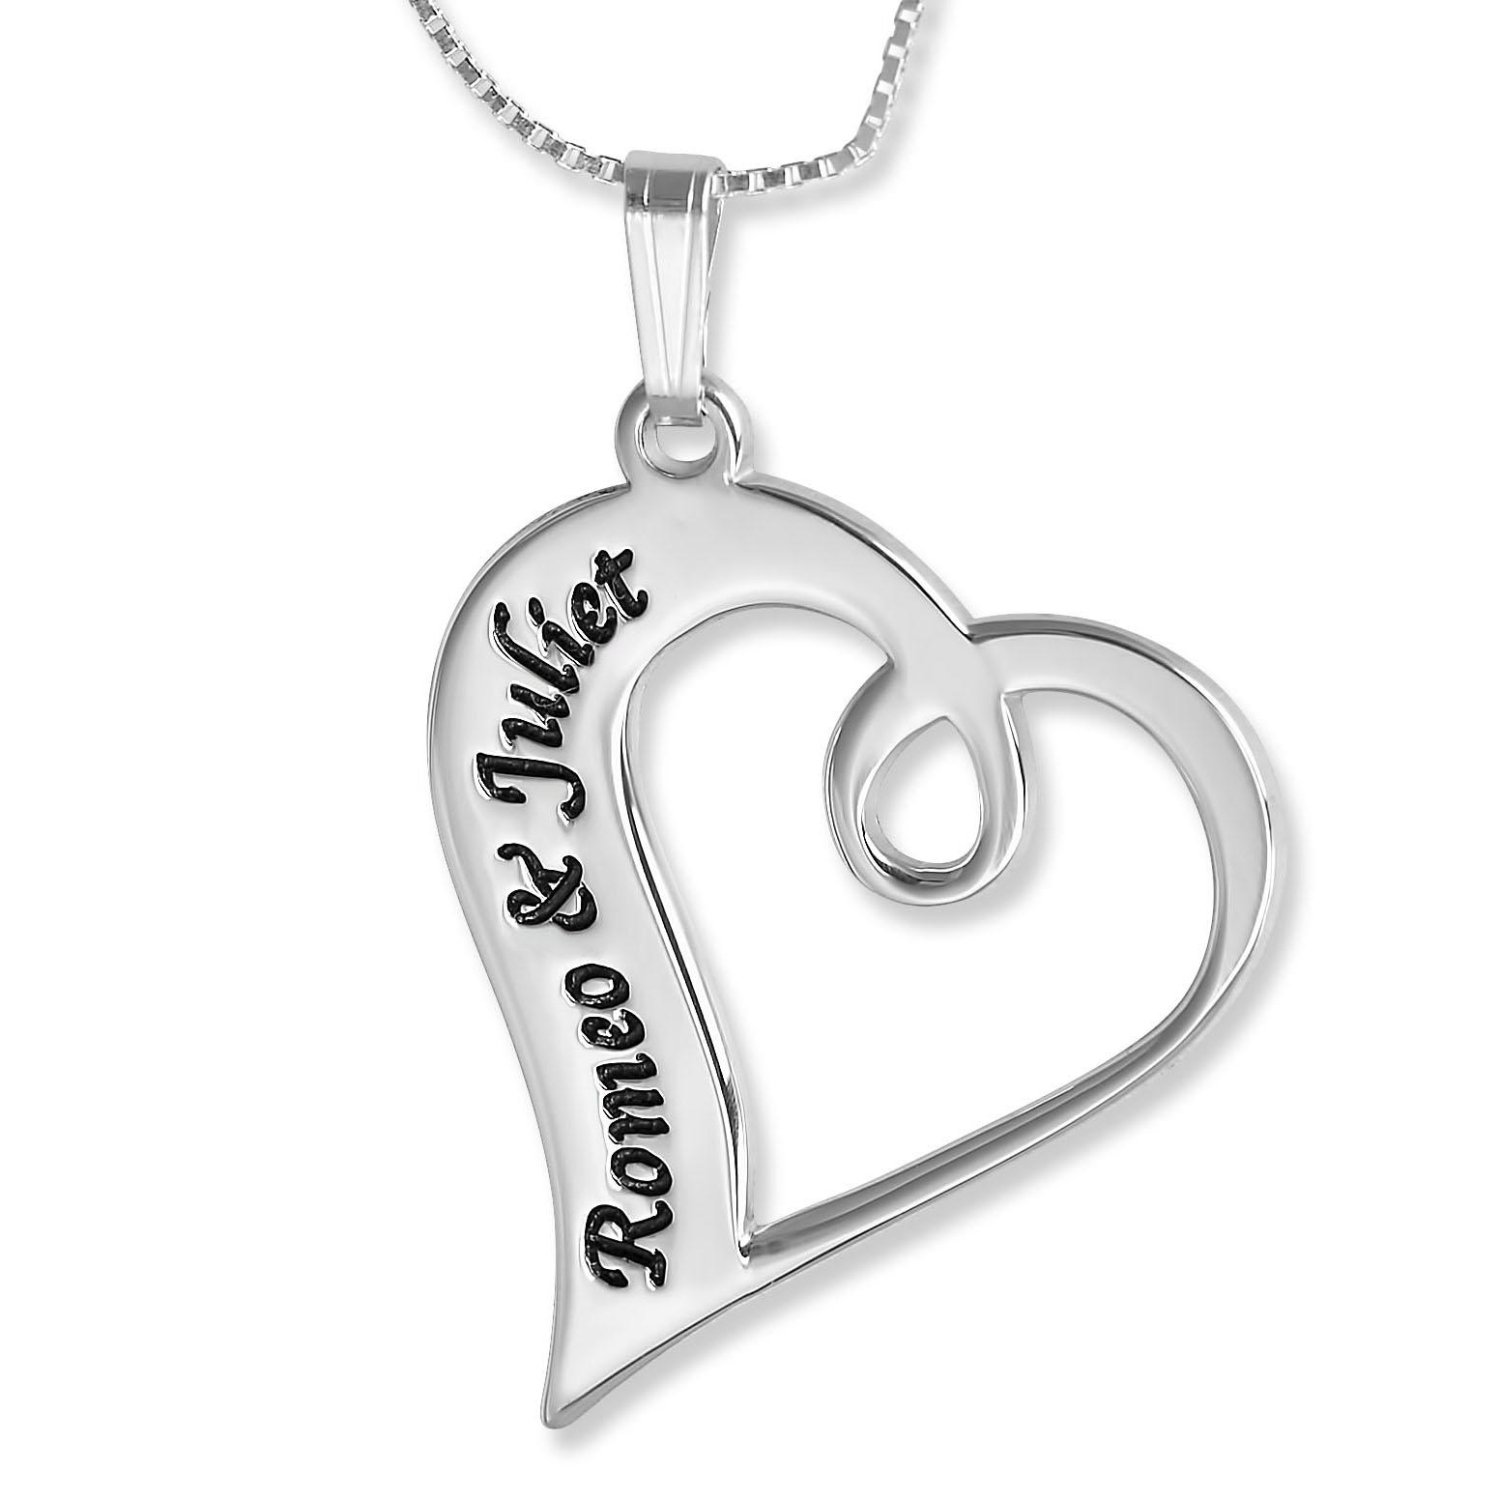 Couples Name Necklace, Twisted Heart Romantic Pendant, Sterling Silver - 1